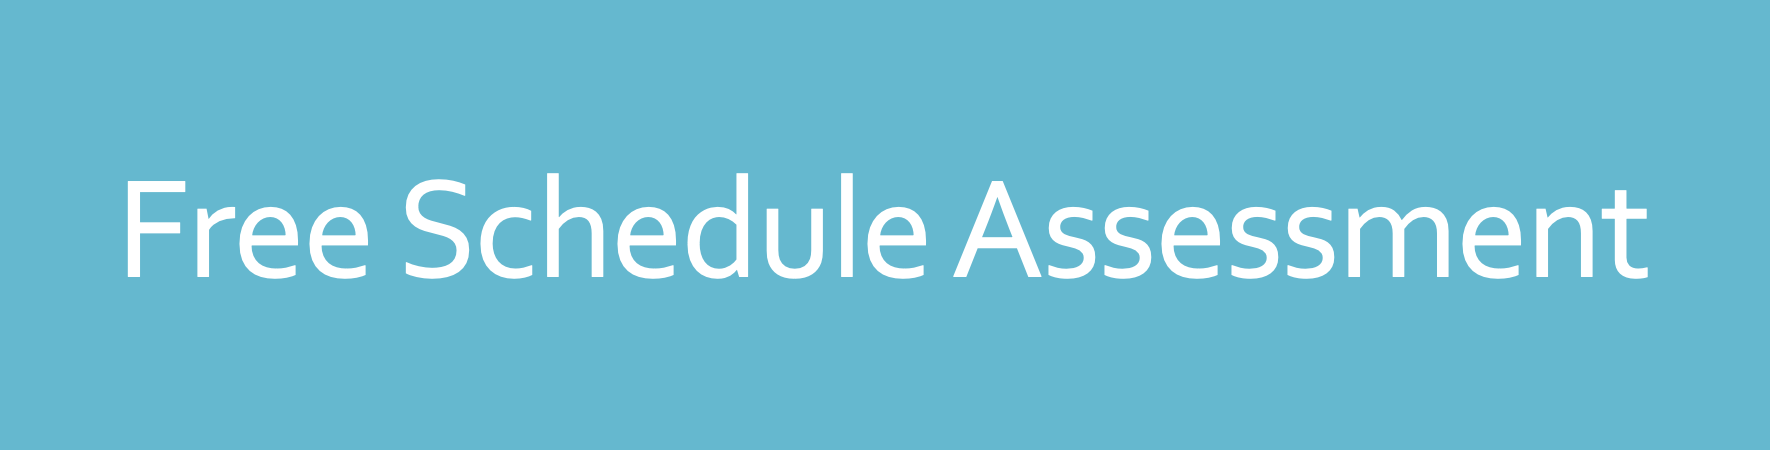 Free Schedule Assessment